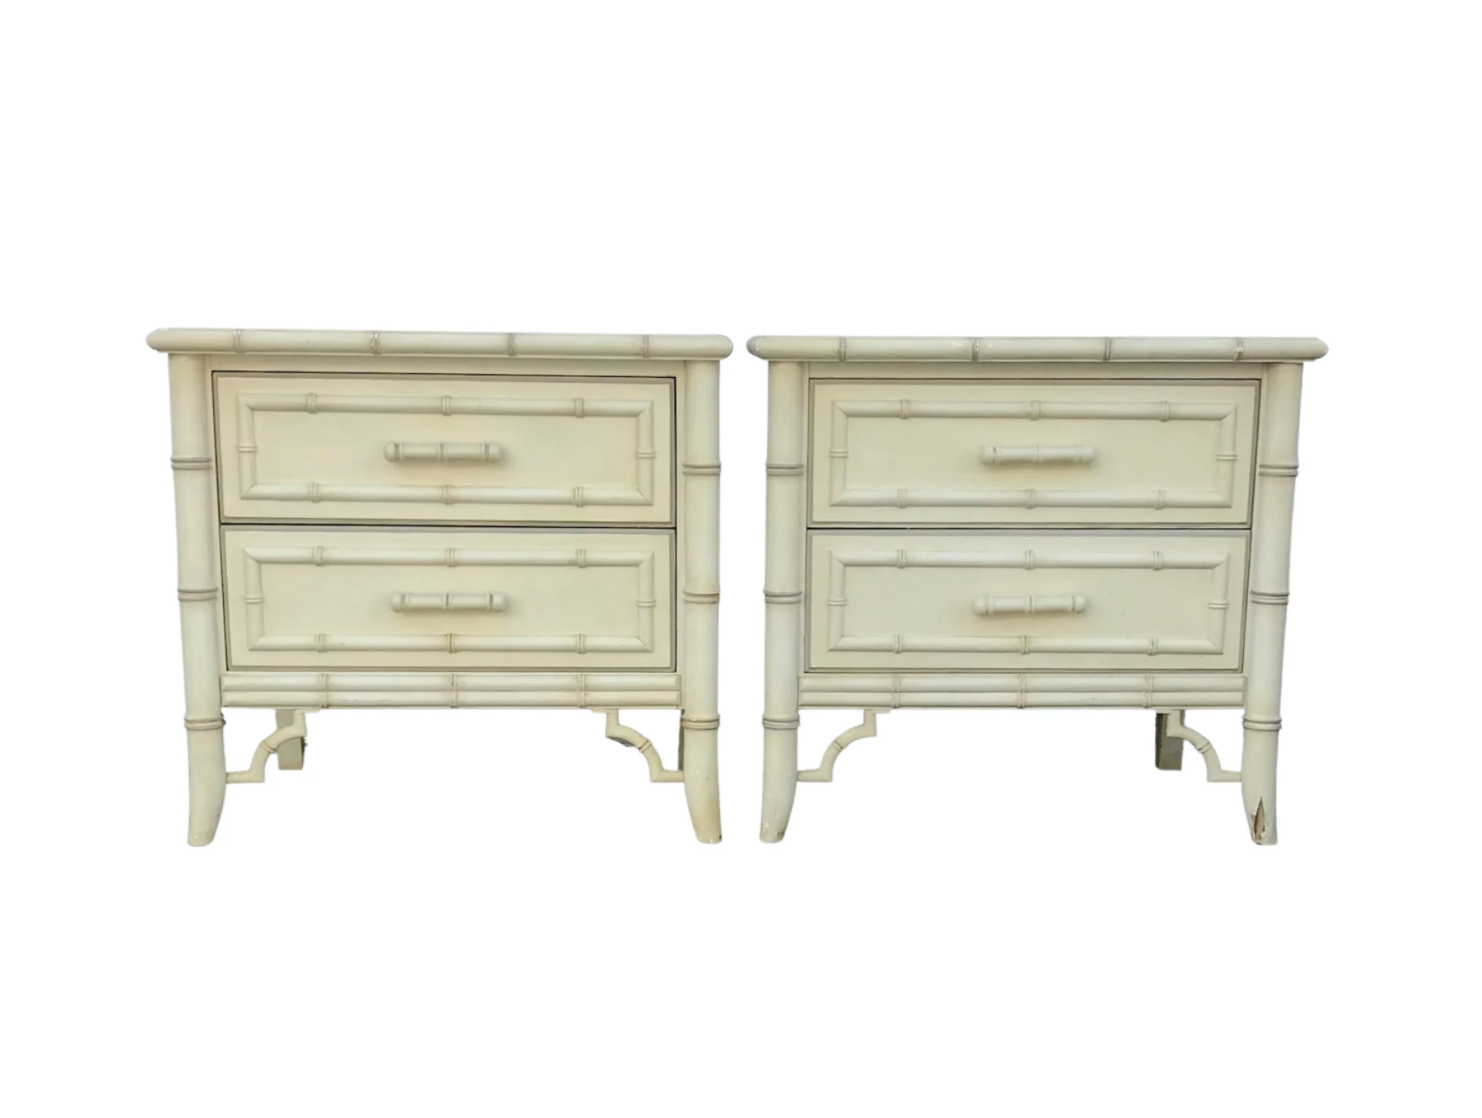 Vintage Dixie Aloha Faux Bamboo Nightstand Pair Available for Custom Lacquer!